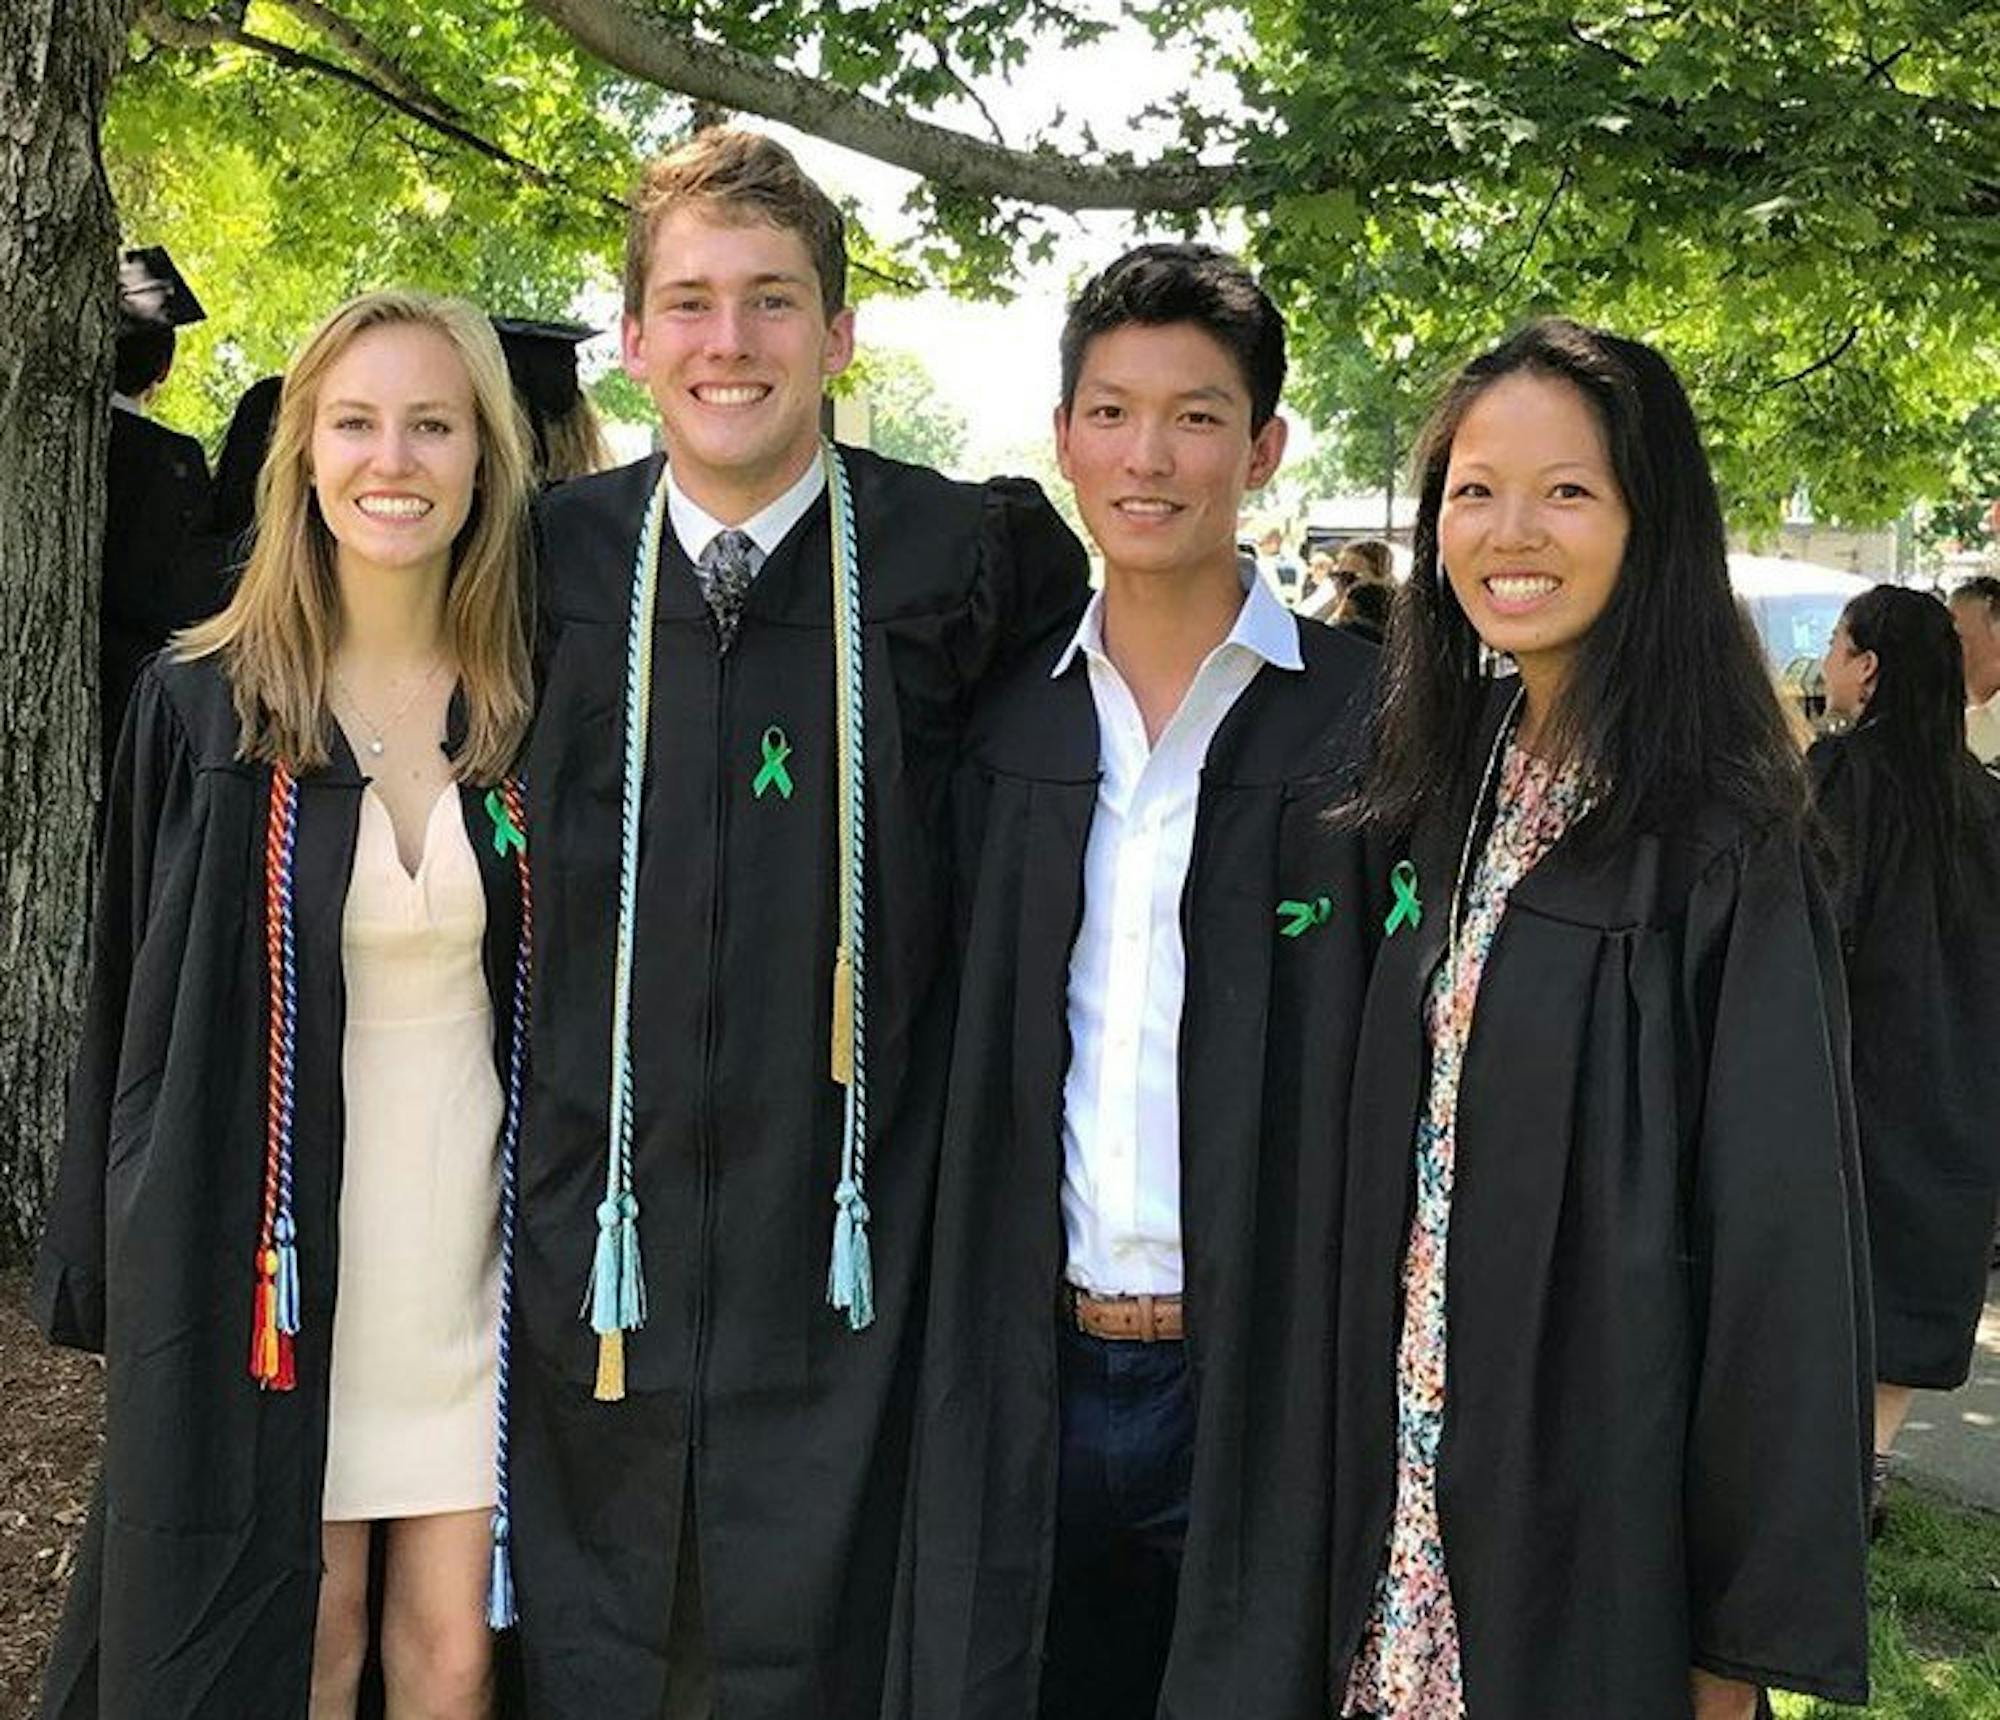 Terence Hughes&nbsp;'17 (second from left) graduated from Dartmouth this June and is currently working in Boston.